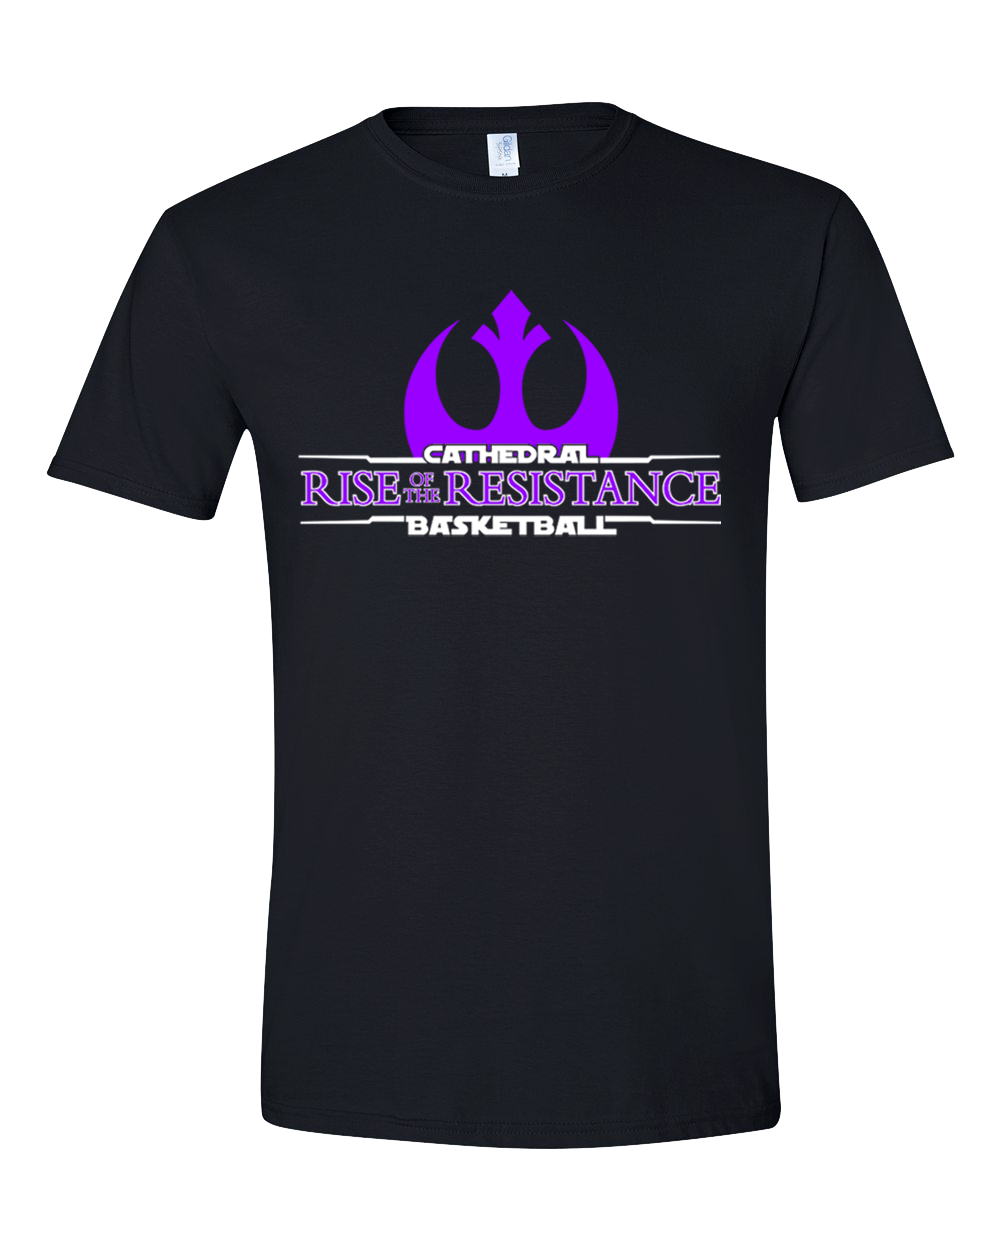 Cathedral Rise of the Resistance Tee